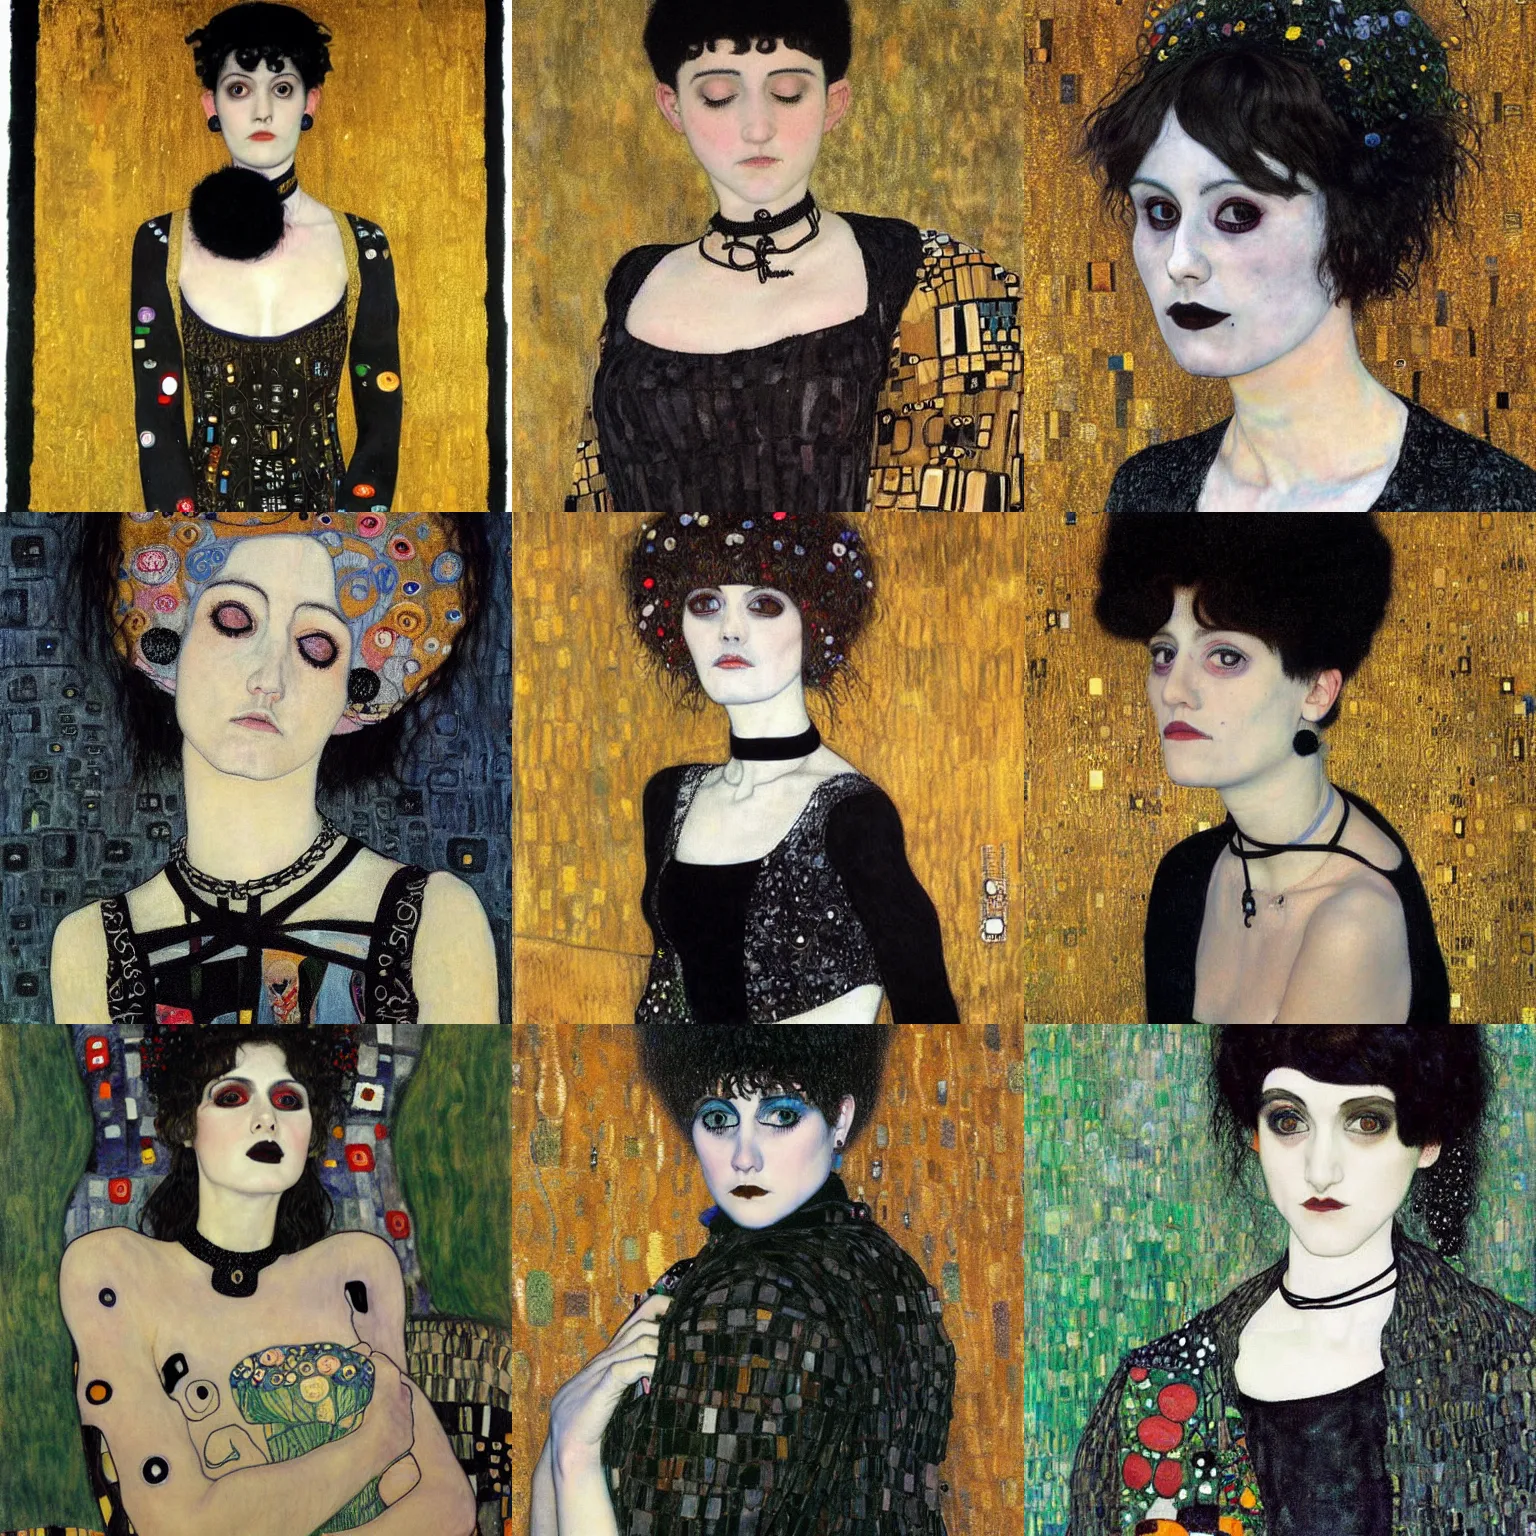 Prompt: A goth painted by Gustav Klimt. Her hair is dark brown and cut into a short, messy pixie cut. She has a slightly rounded face, with a pointed chin, large entirely-black eyes, and a small nose. She is wearing a black tank top, a black leather jacket, a black knee-length skirt, a black choker, and black leather boots.